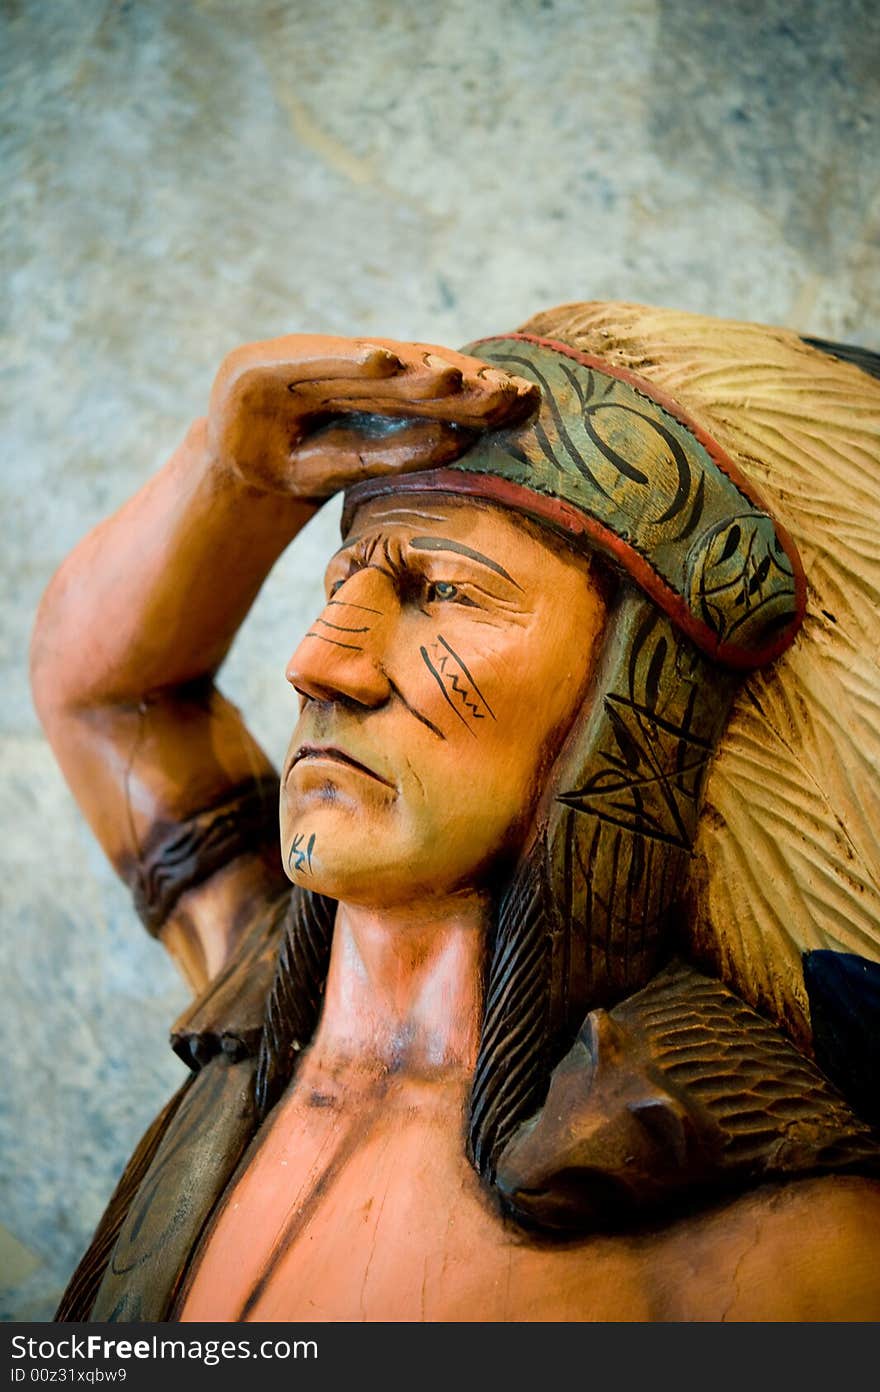 An image of a cigar Indian statue